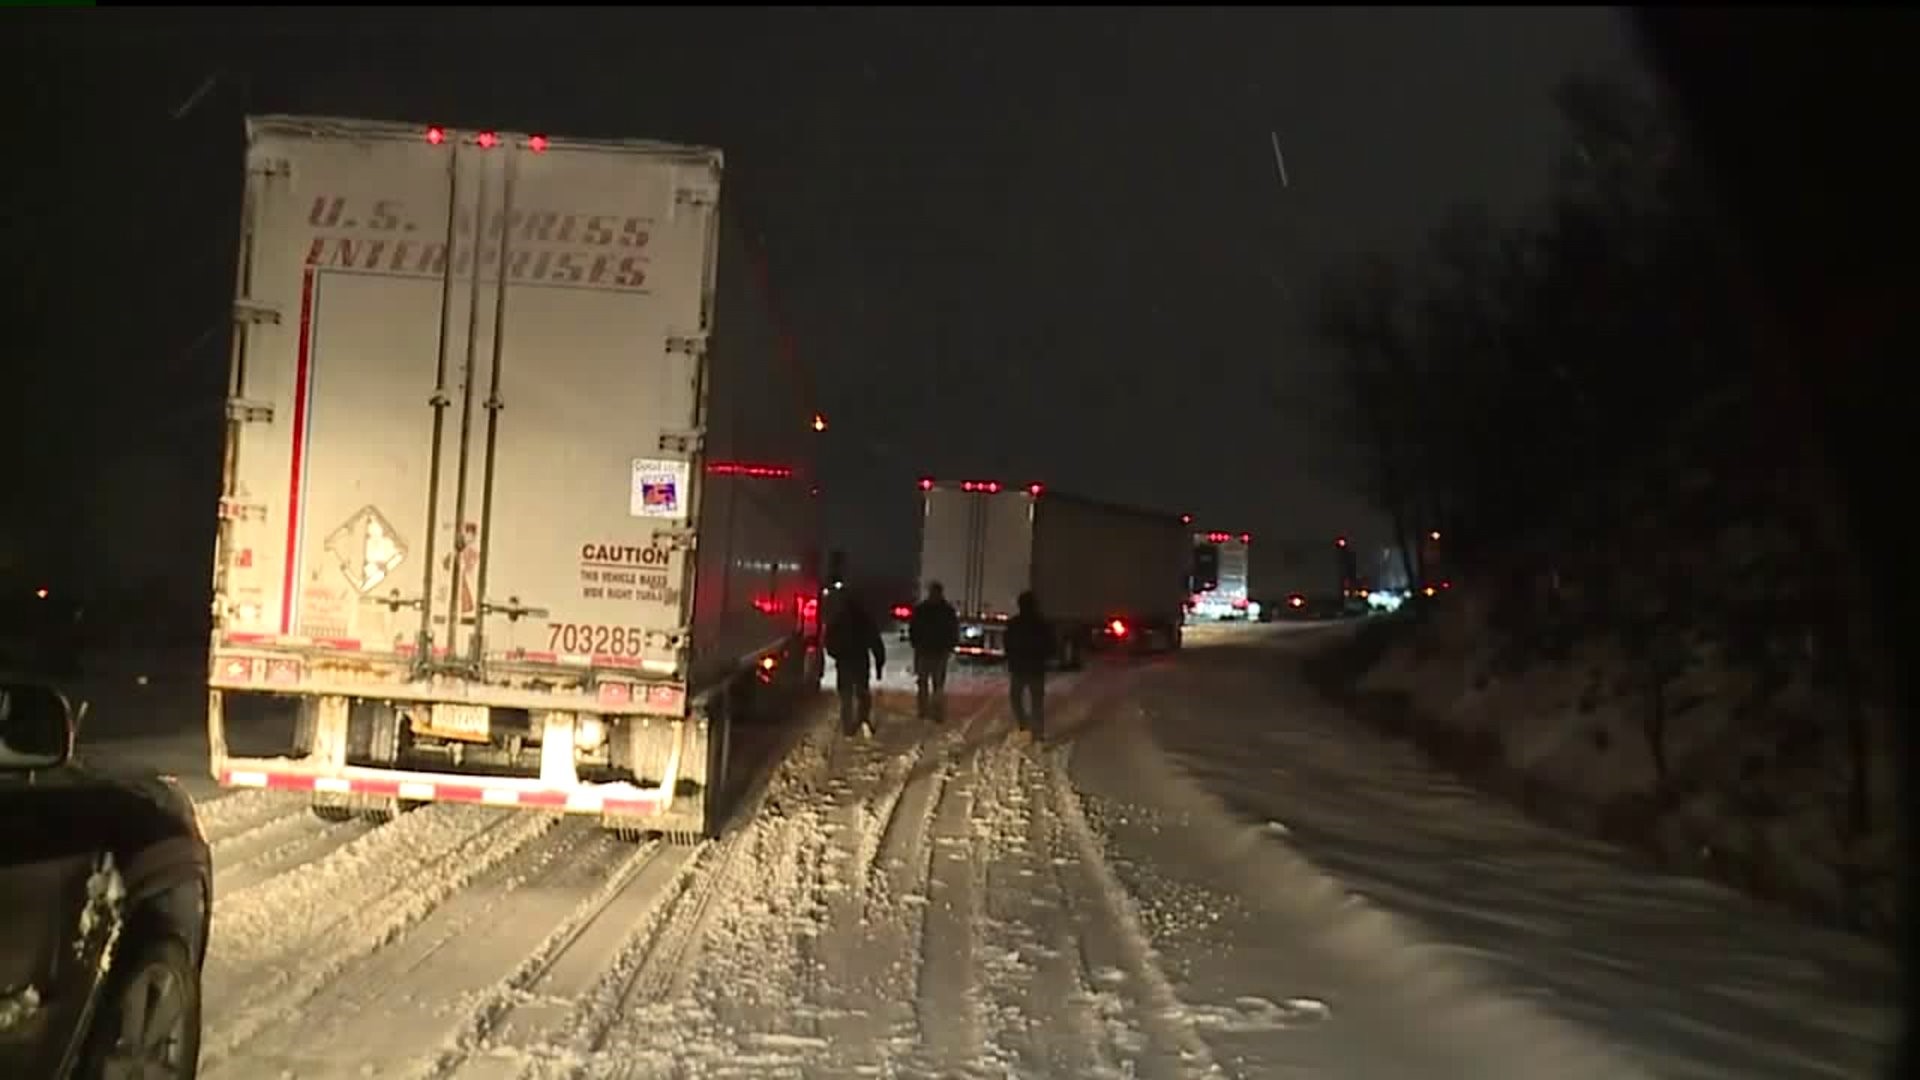 Snow Causing Traffic Headaches Along Interstate 81 South in Luzerne County